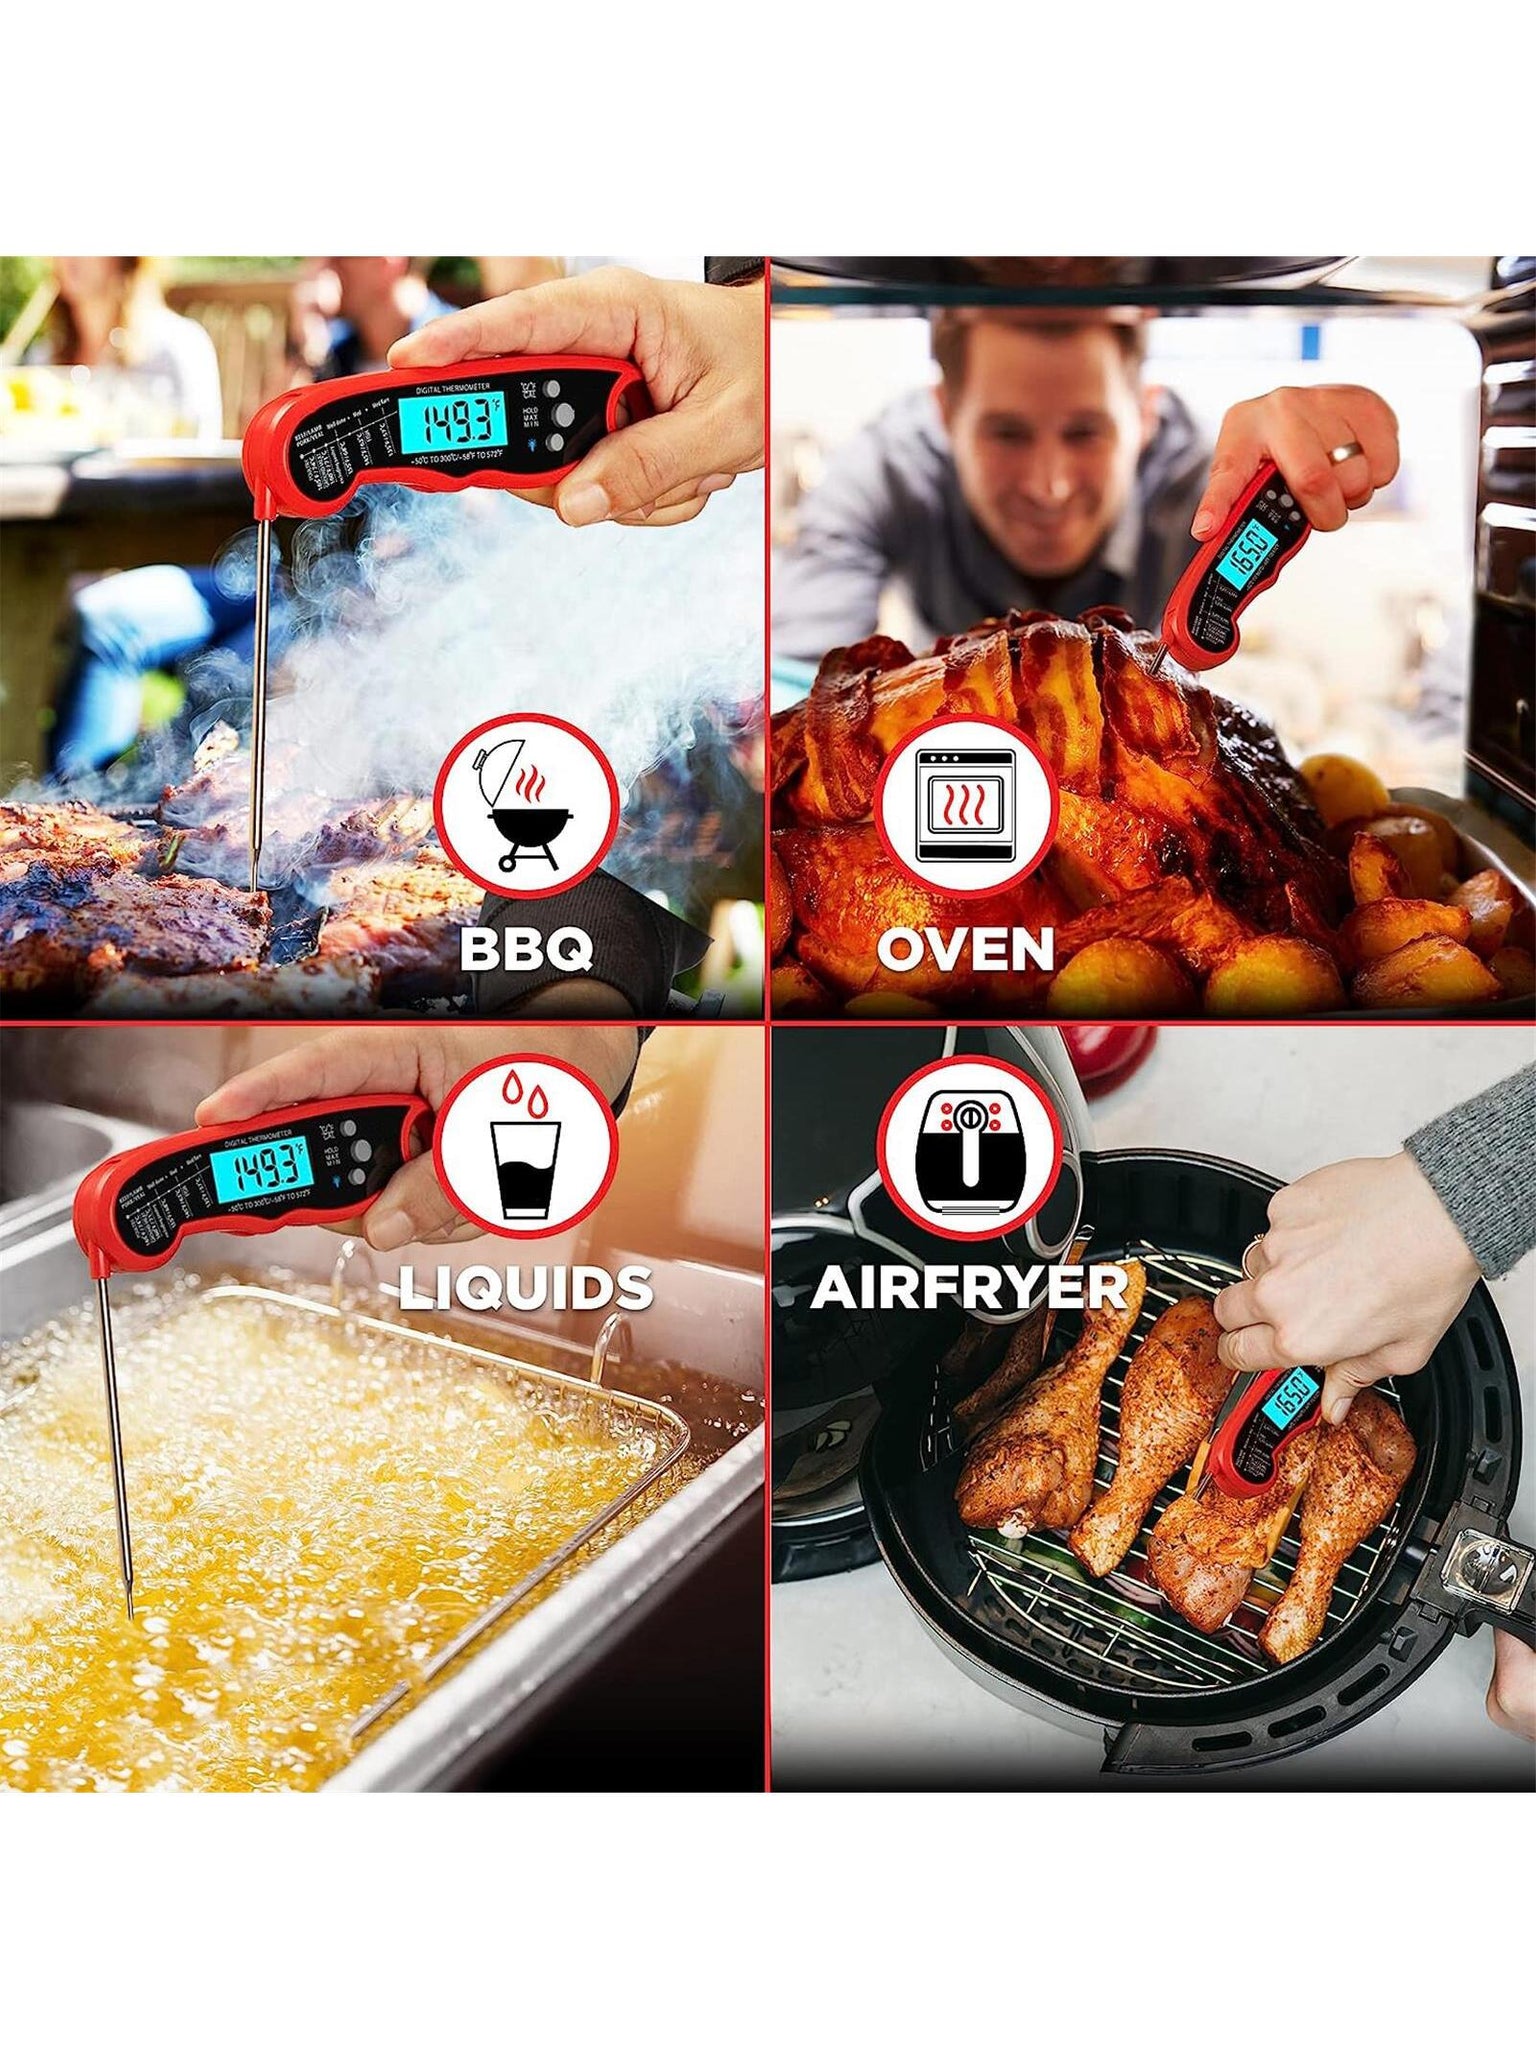 Meat Thermometer, Suitable For Barbecue And Cooking, Best Waterproof Ultra Fast, Instant Read With Backlight And Calibration, Digital Food Probe For Kitchen, Outdoor Bbq And Grilling-Reddish black-7